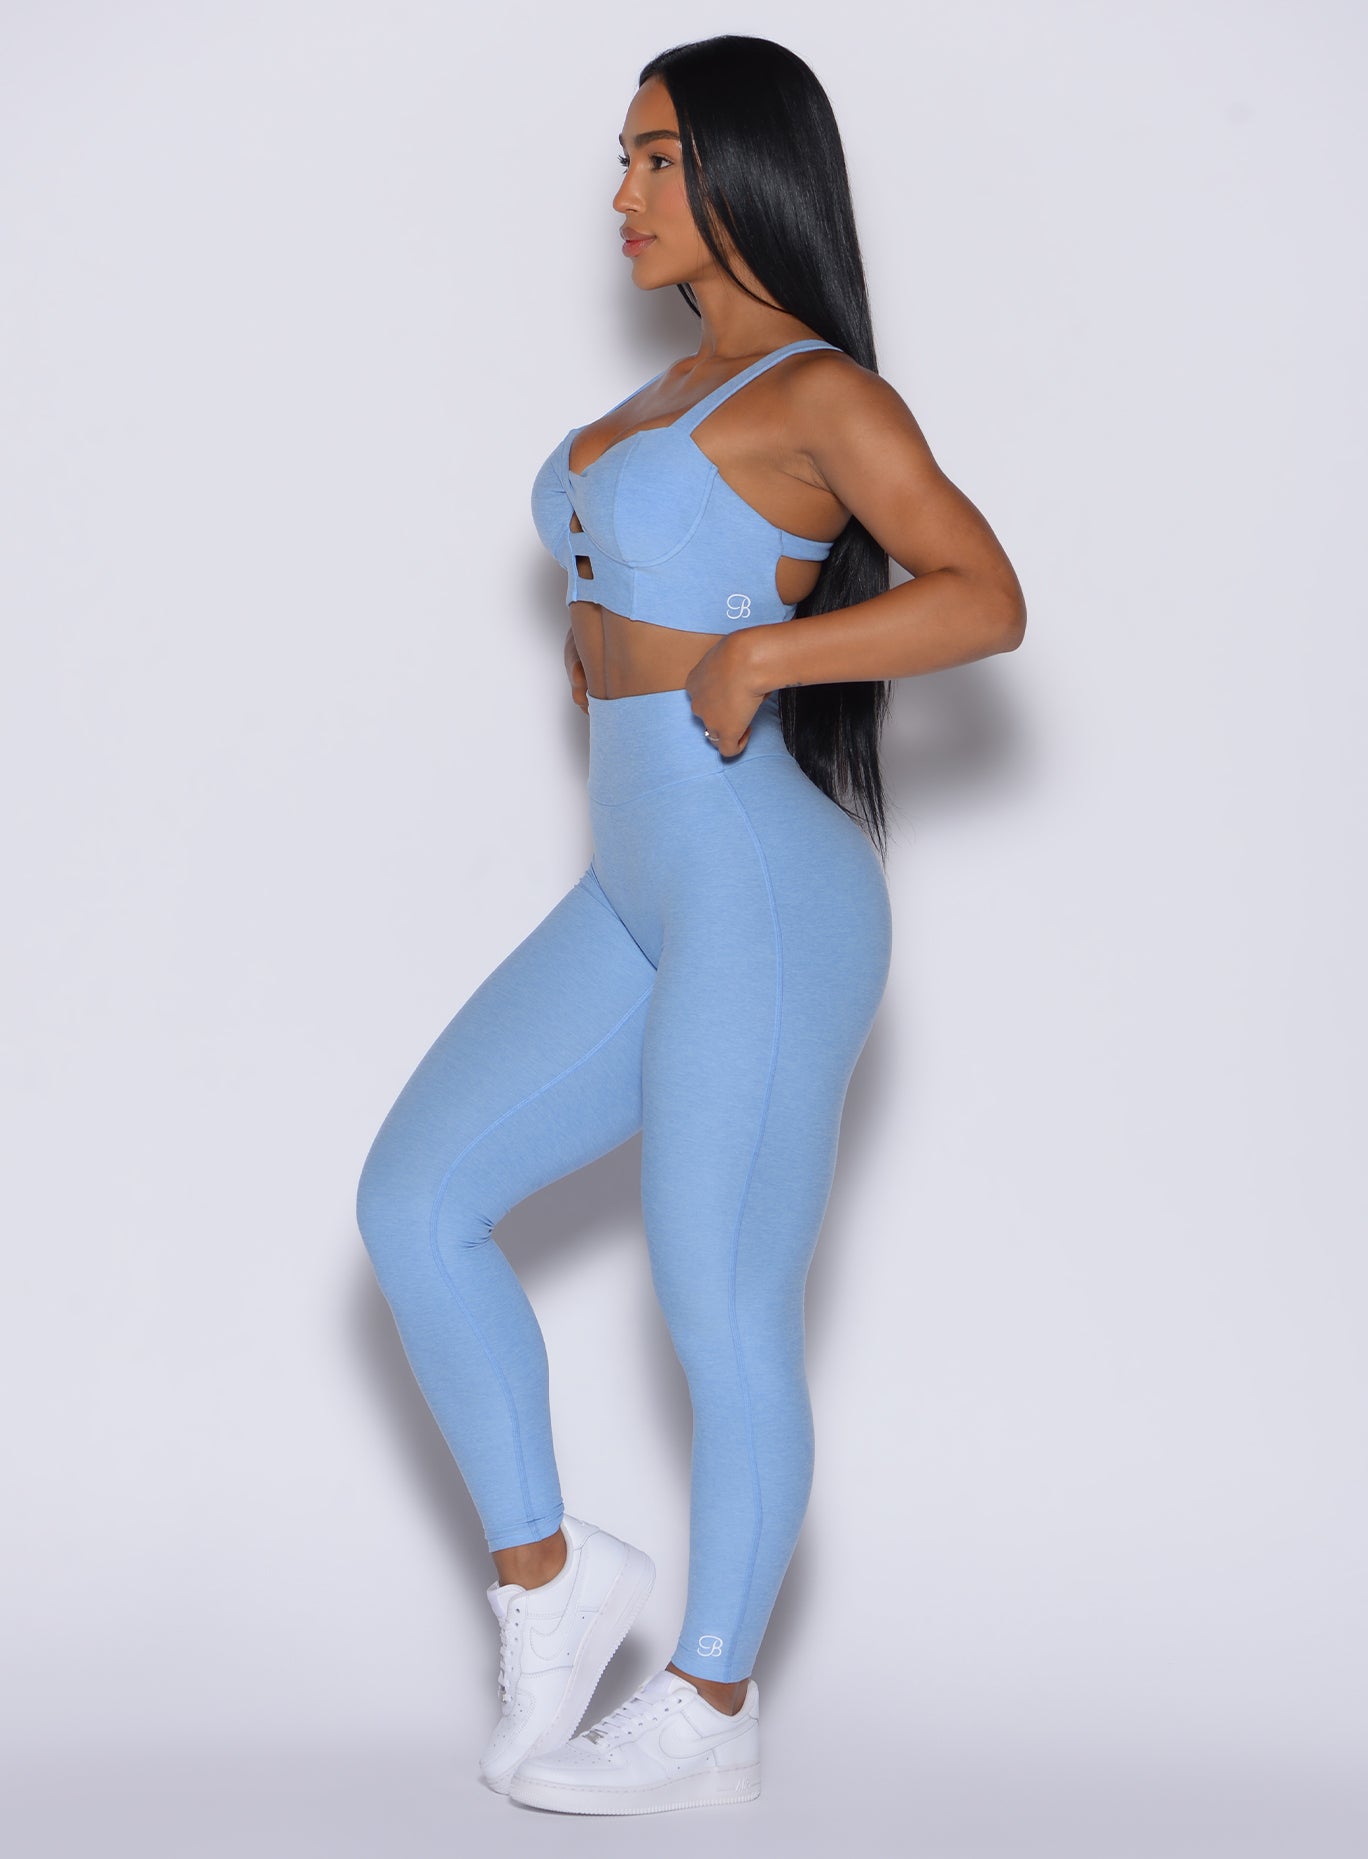 Left side view of a model facing forward wearing our Movement Leggings in Bright Hydrangea color and a matching Sports Bra